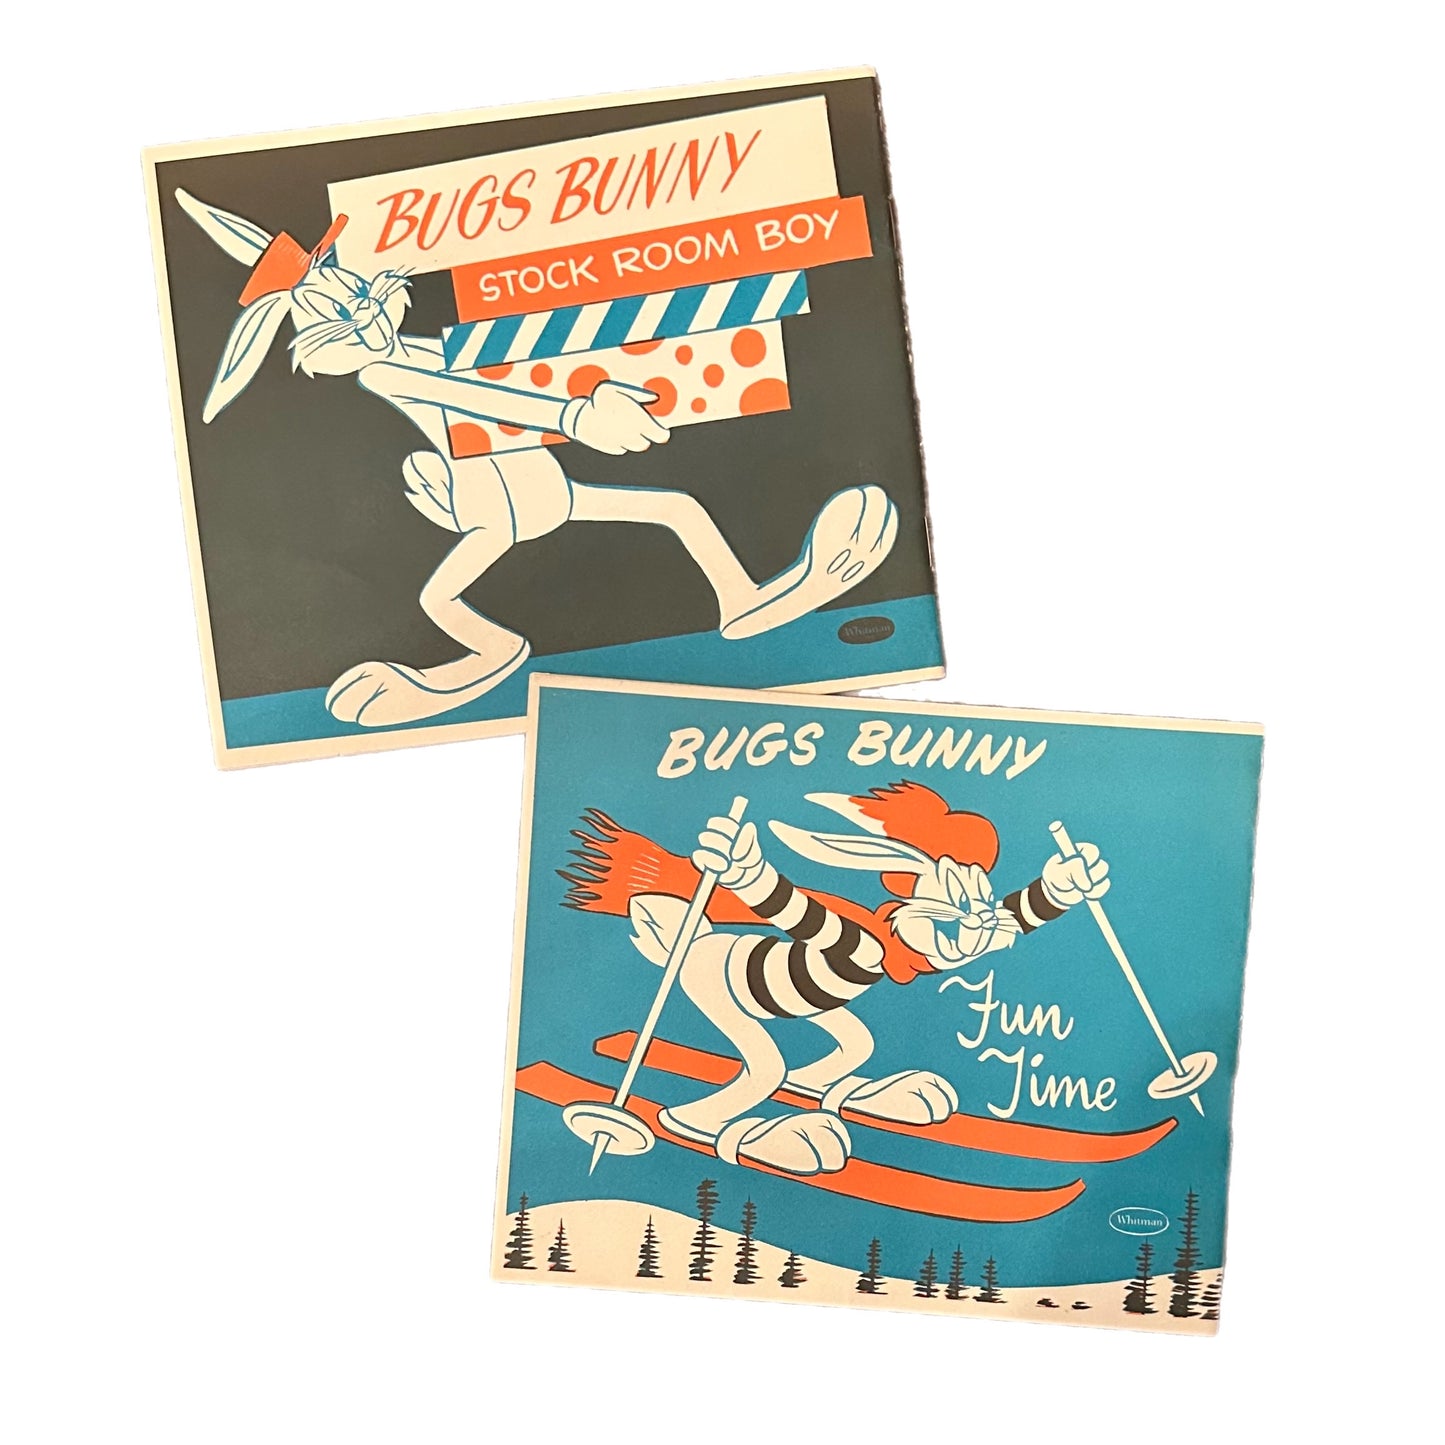 VINTAGE BUGS BUNNY COLORING BOOK PAIR (1957) - Two (2) Tiny Whitman Children's Books